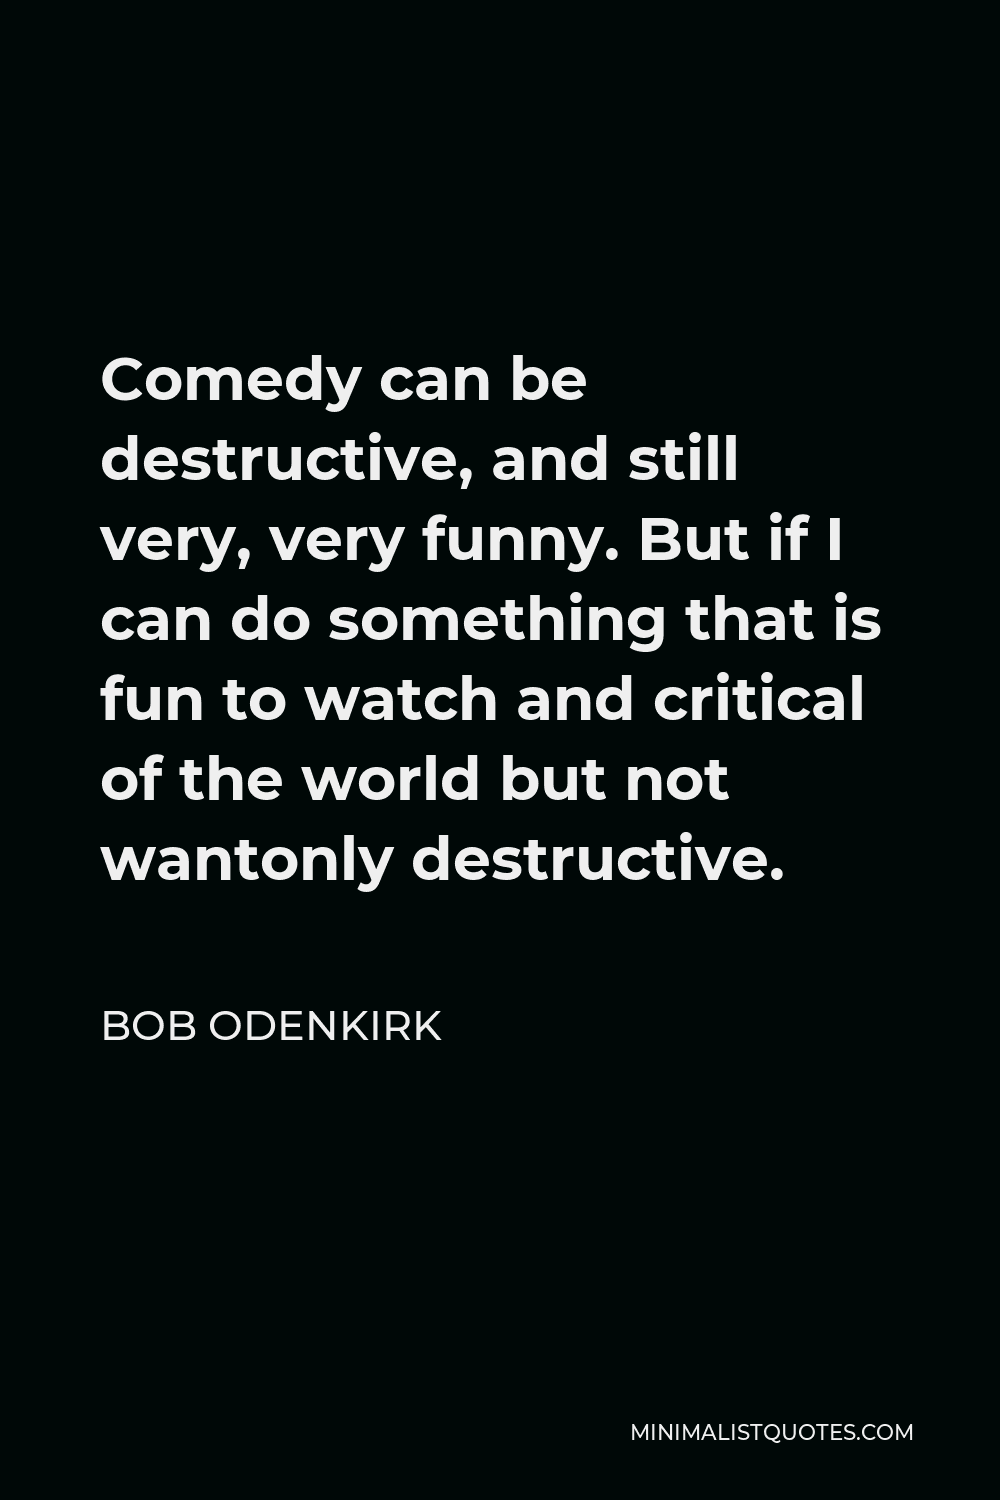 Bob Odenkirk Quote - Comedy can be destructive, and still very, very funny. But if I can do something that is fun to watch and critical of the world but not wantonly destructive.